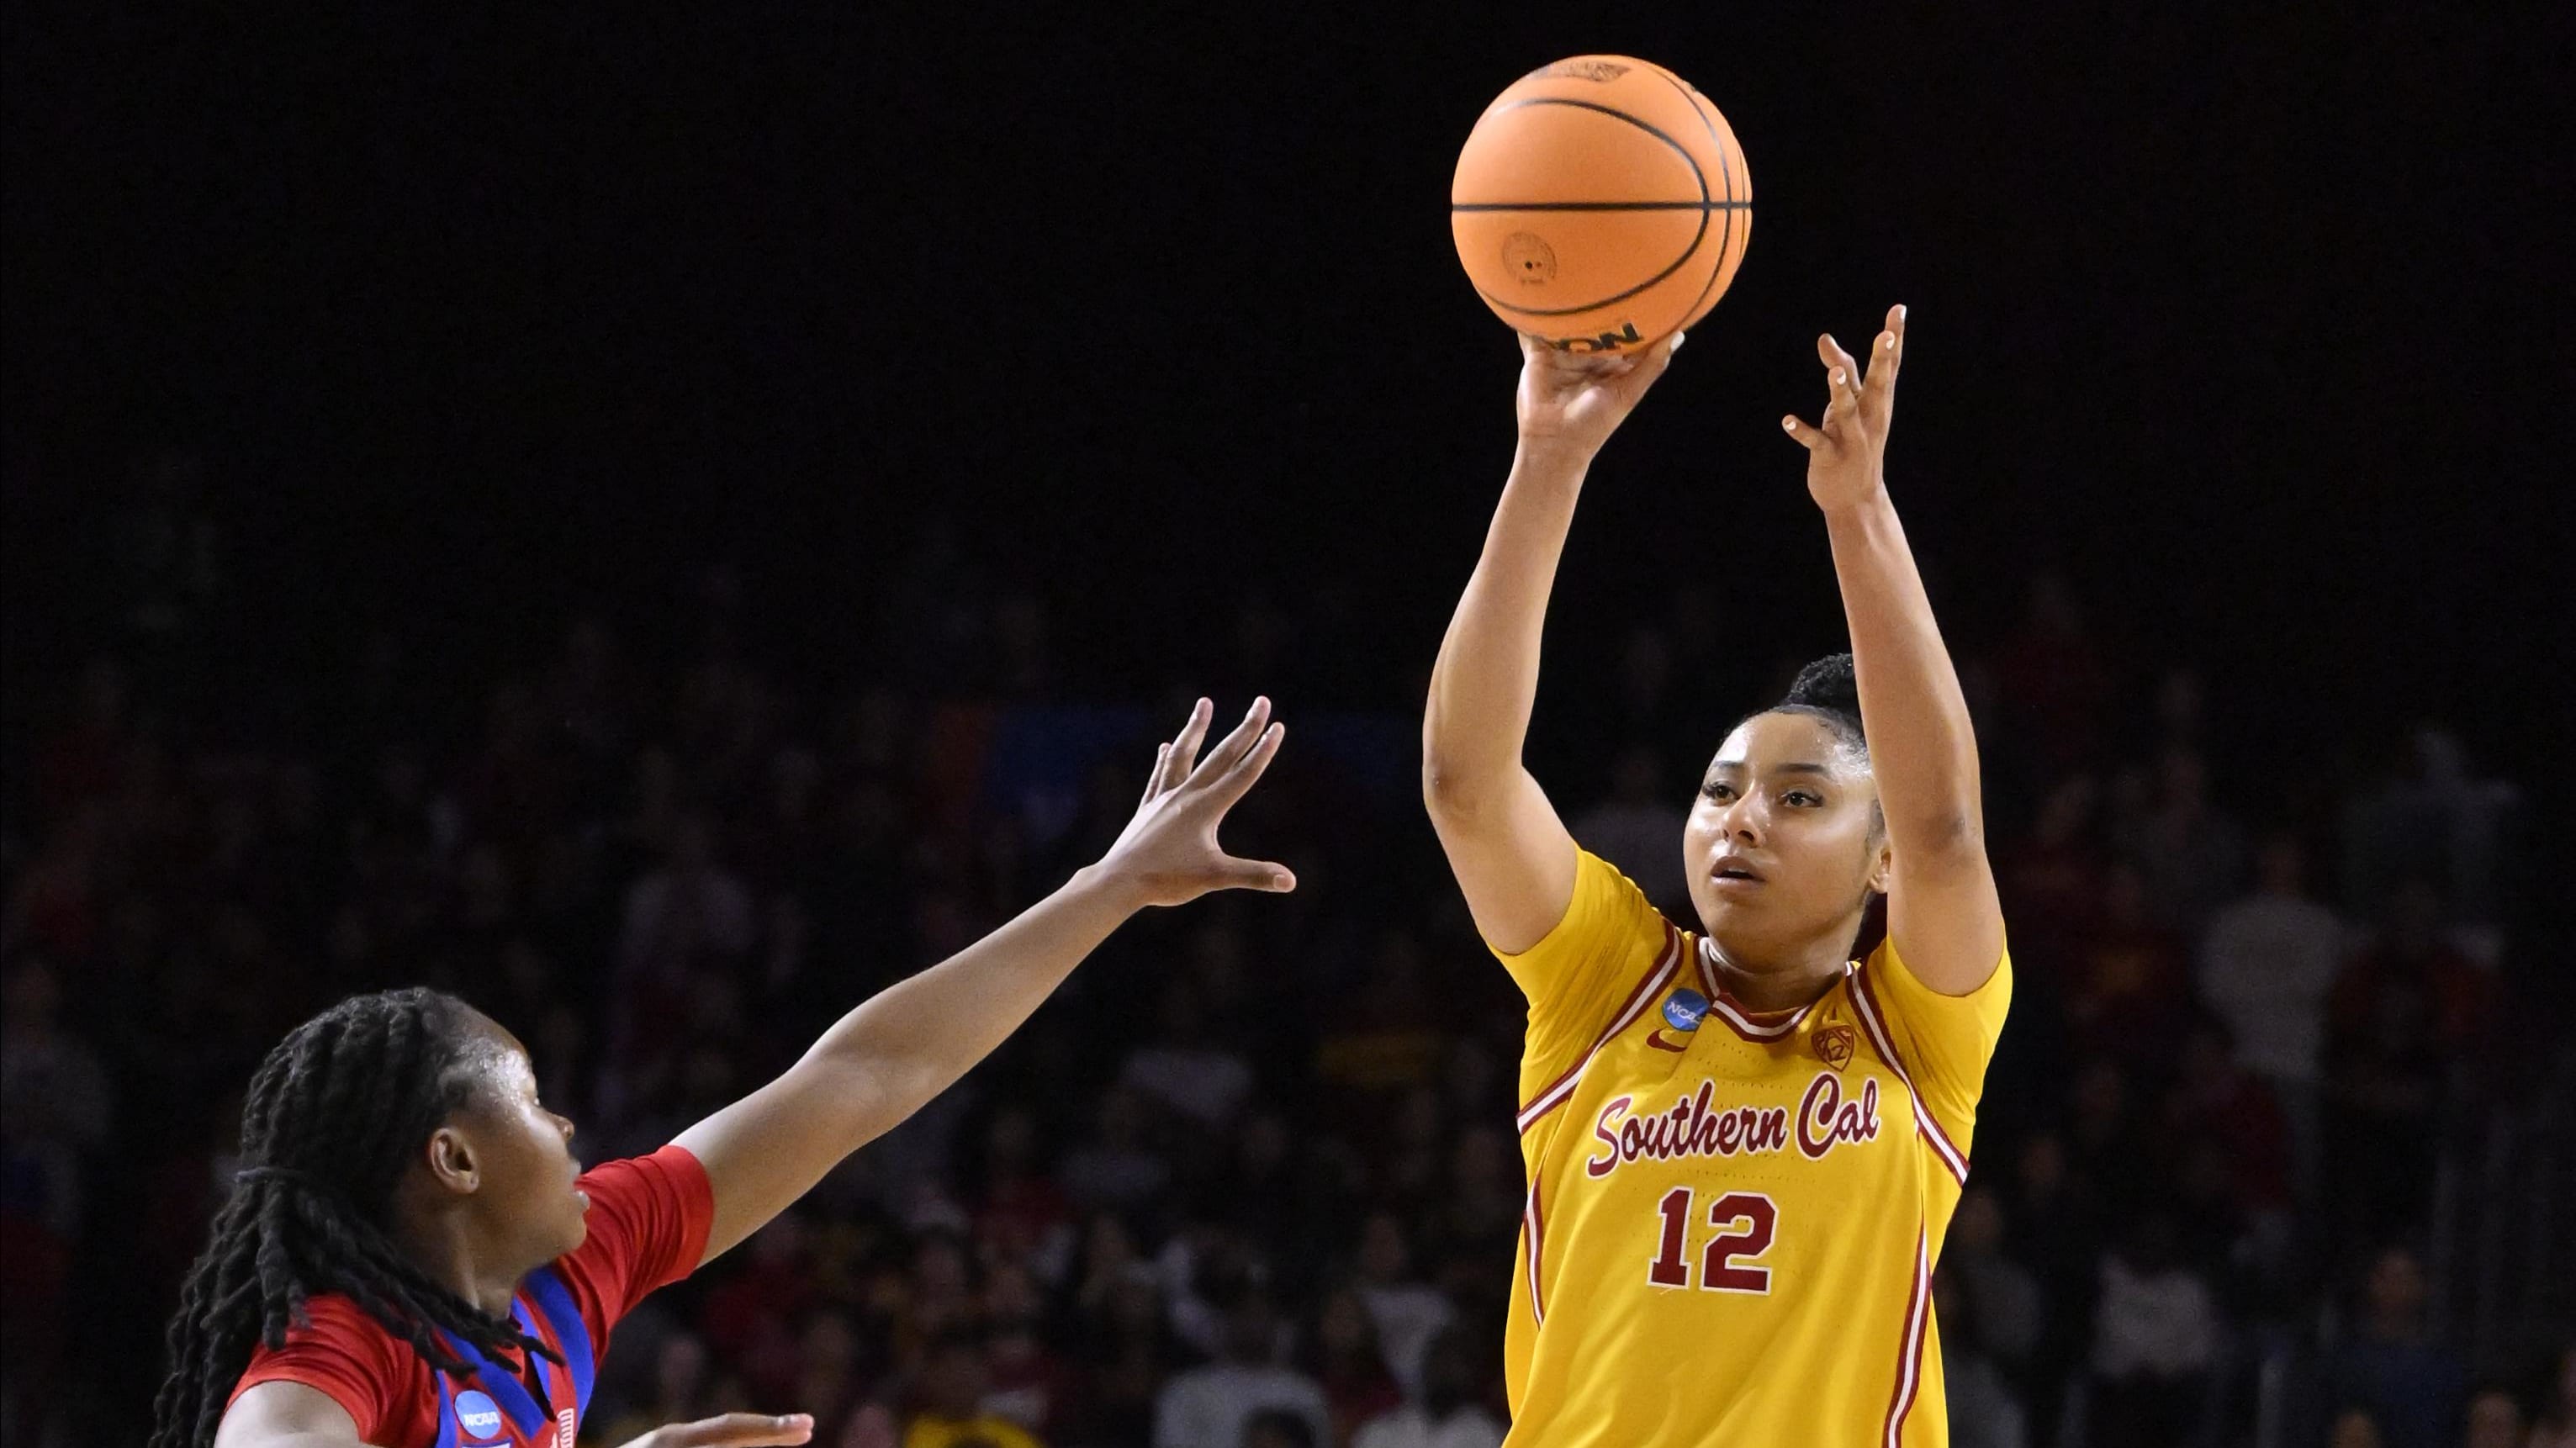 USC Women's Basketball vs Baylor: How to Watch, Odds, Predictions, and More